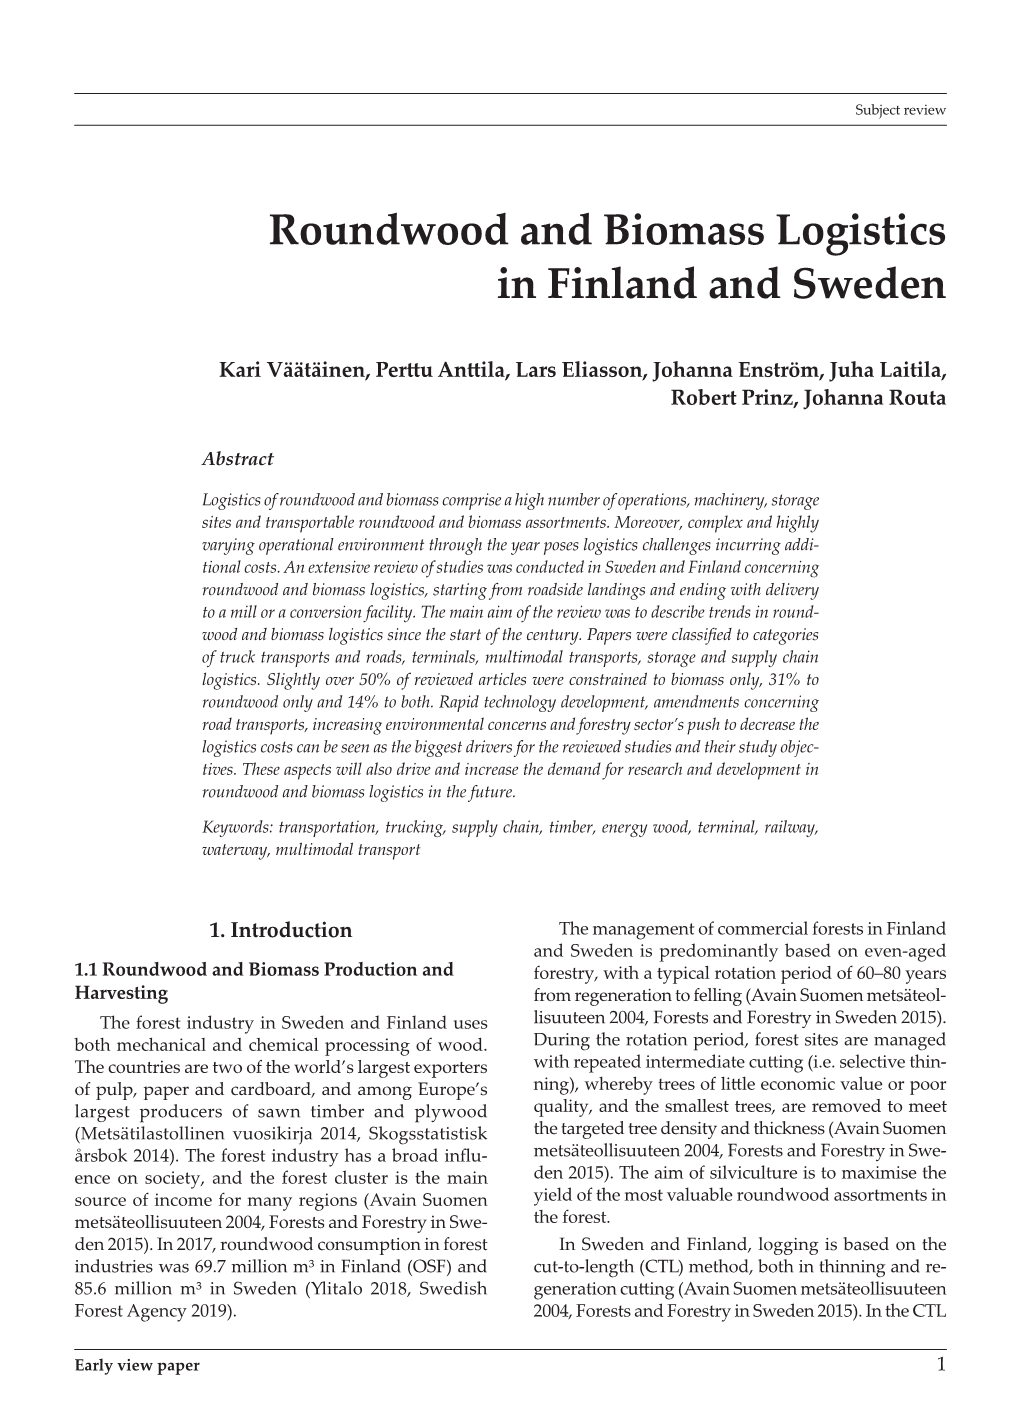 Roundwood and Biomass Logistics in Finland and Sweden